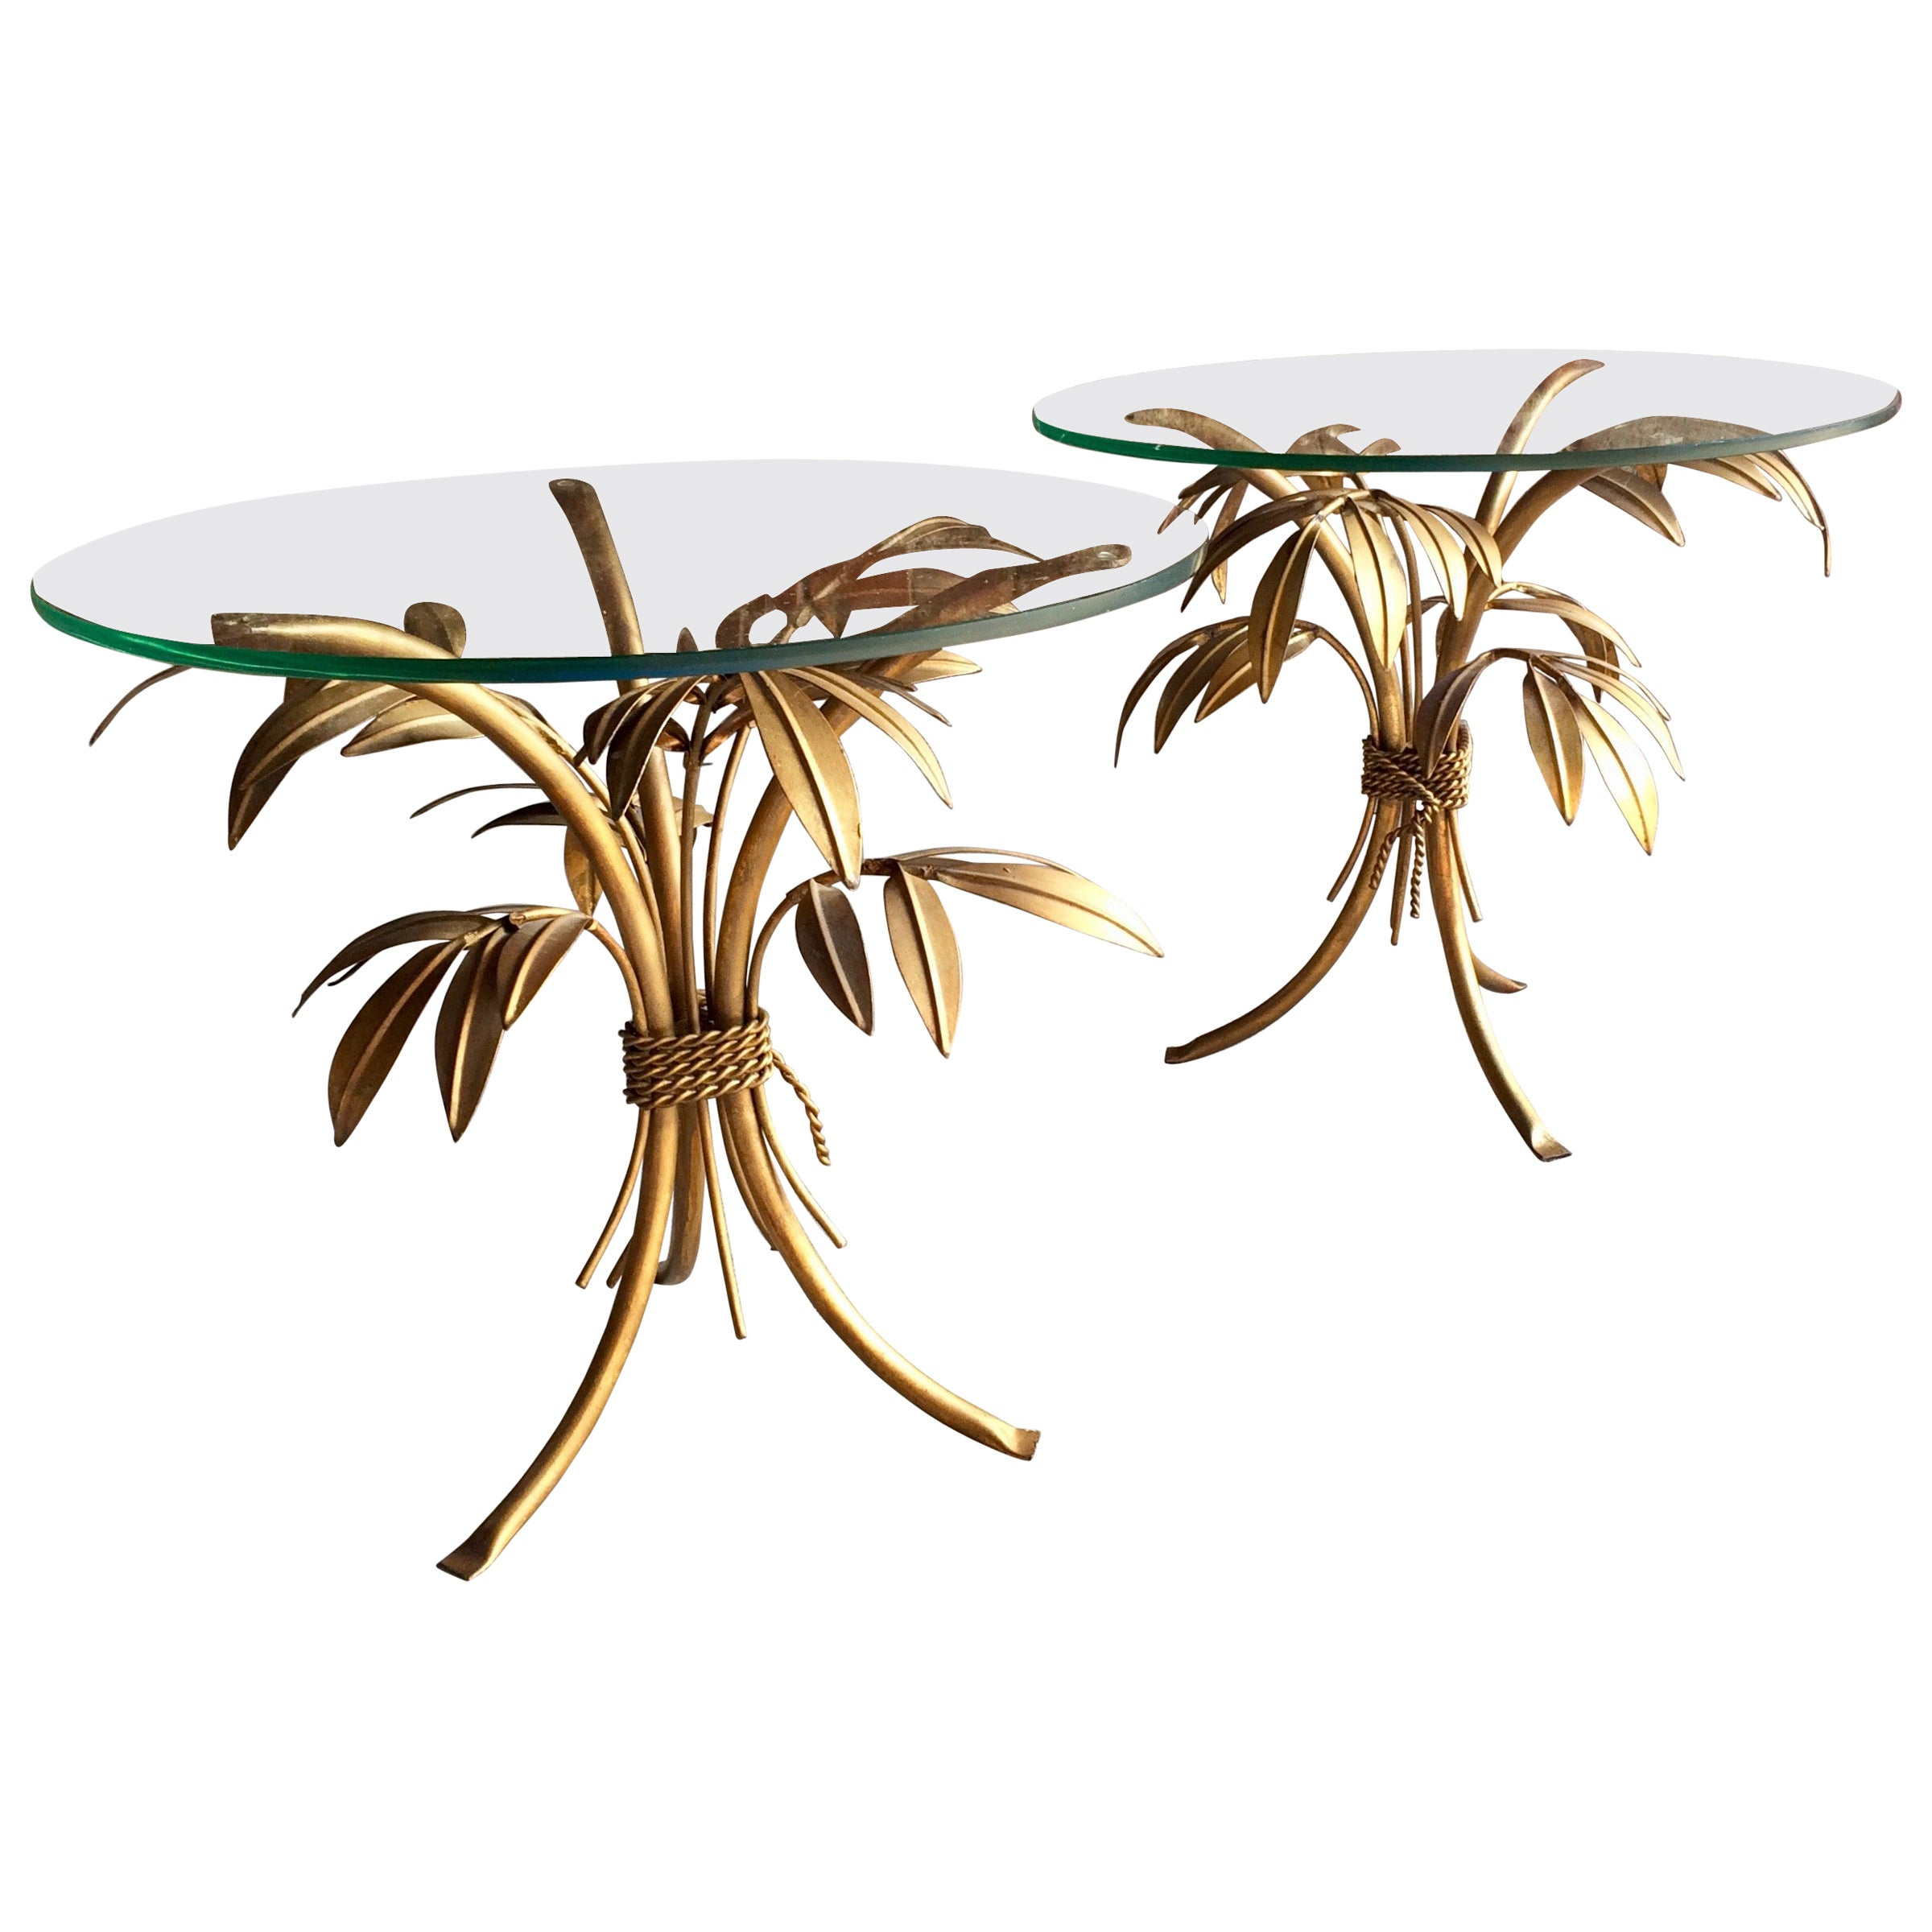 Stunning Hans Kgl Gold Palm Tree Side Tables Pair Hollywood Regency intended for sizing 2400 X 2400